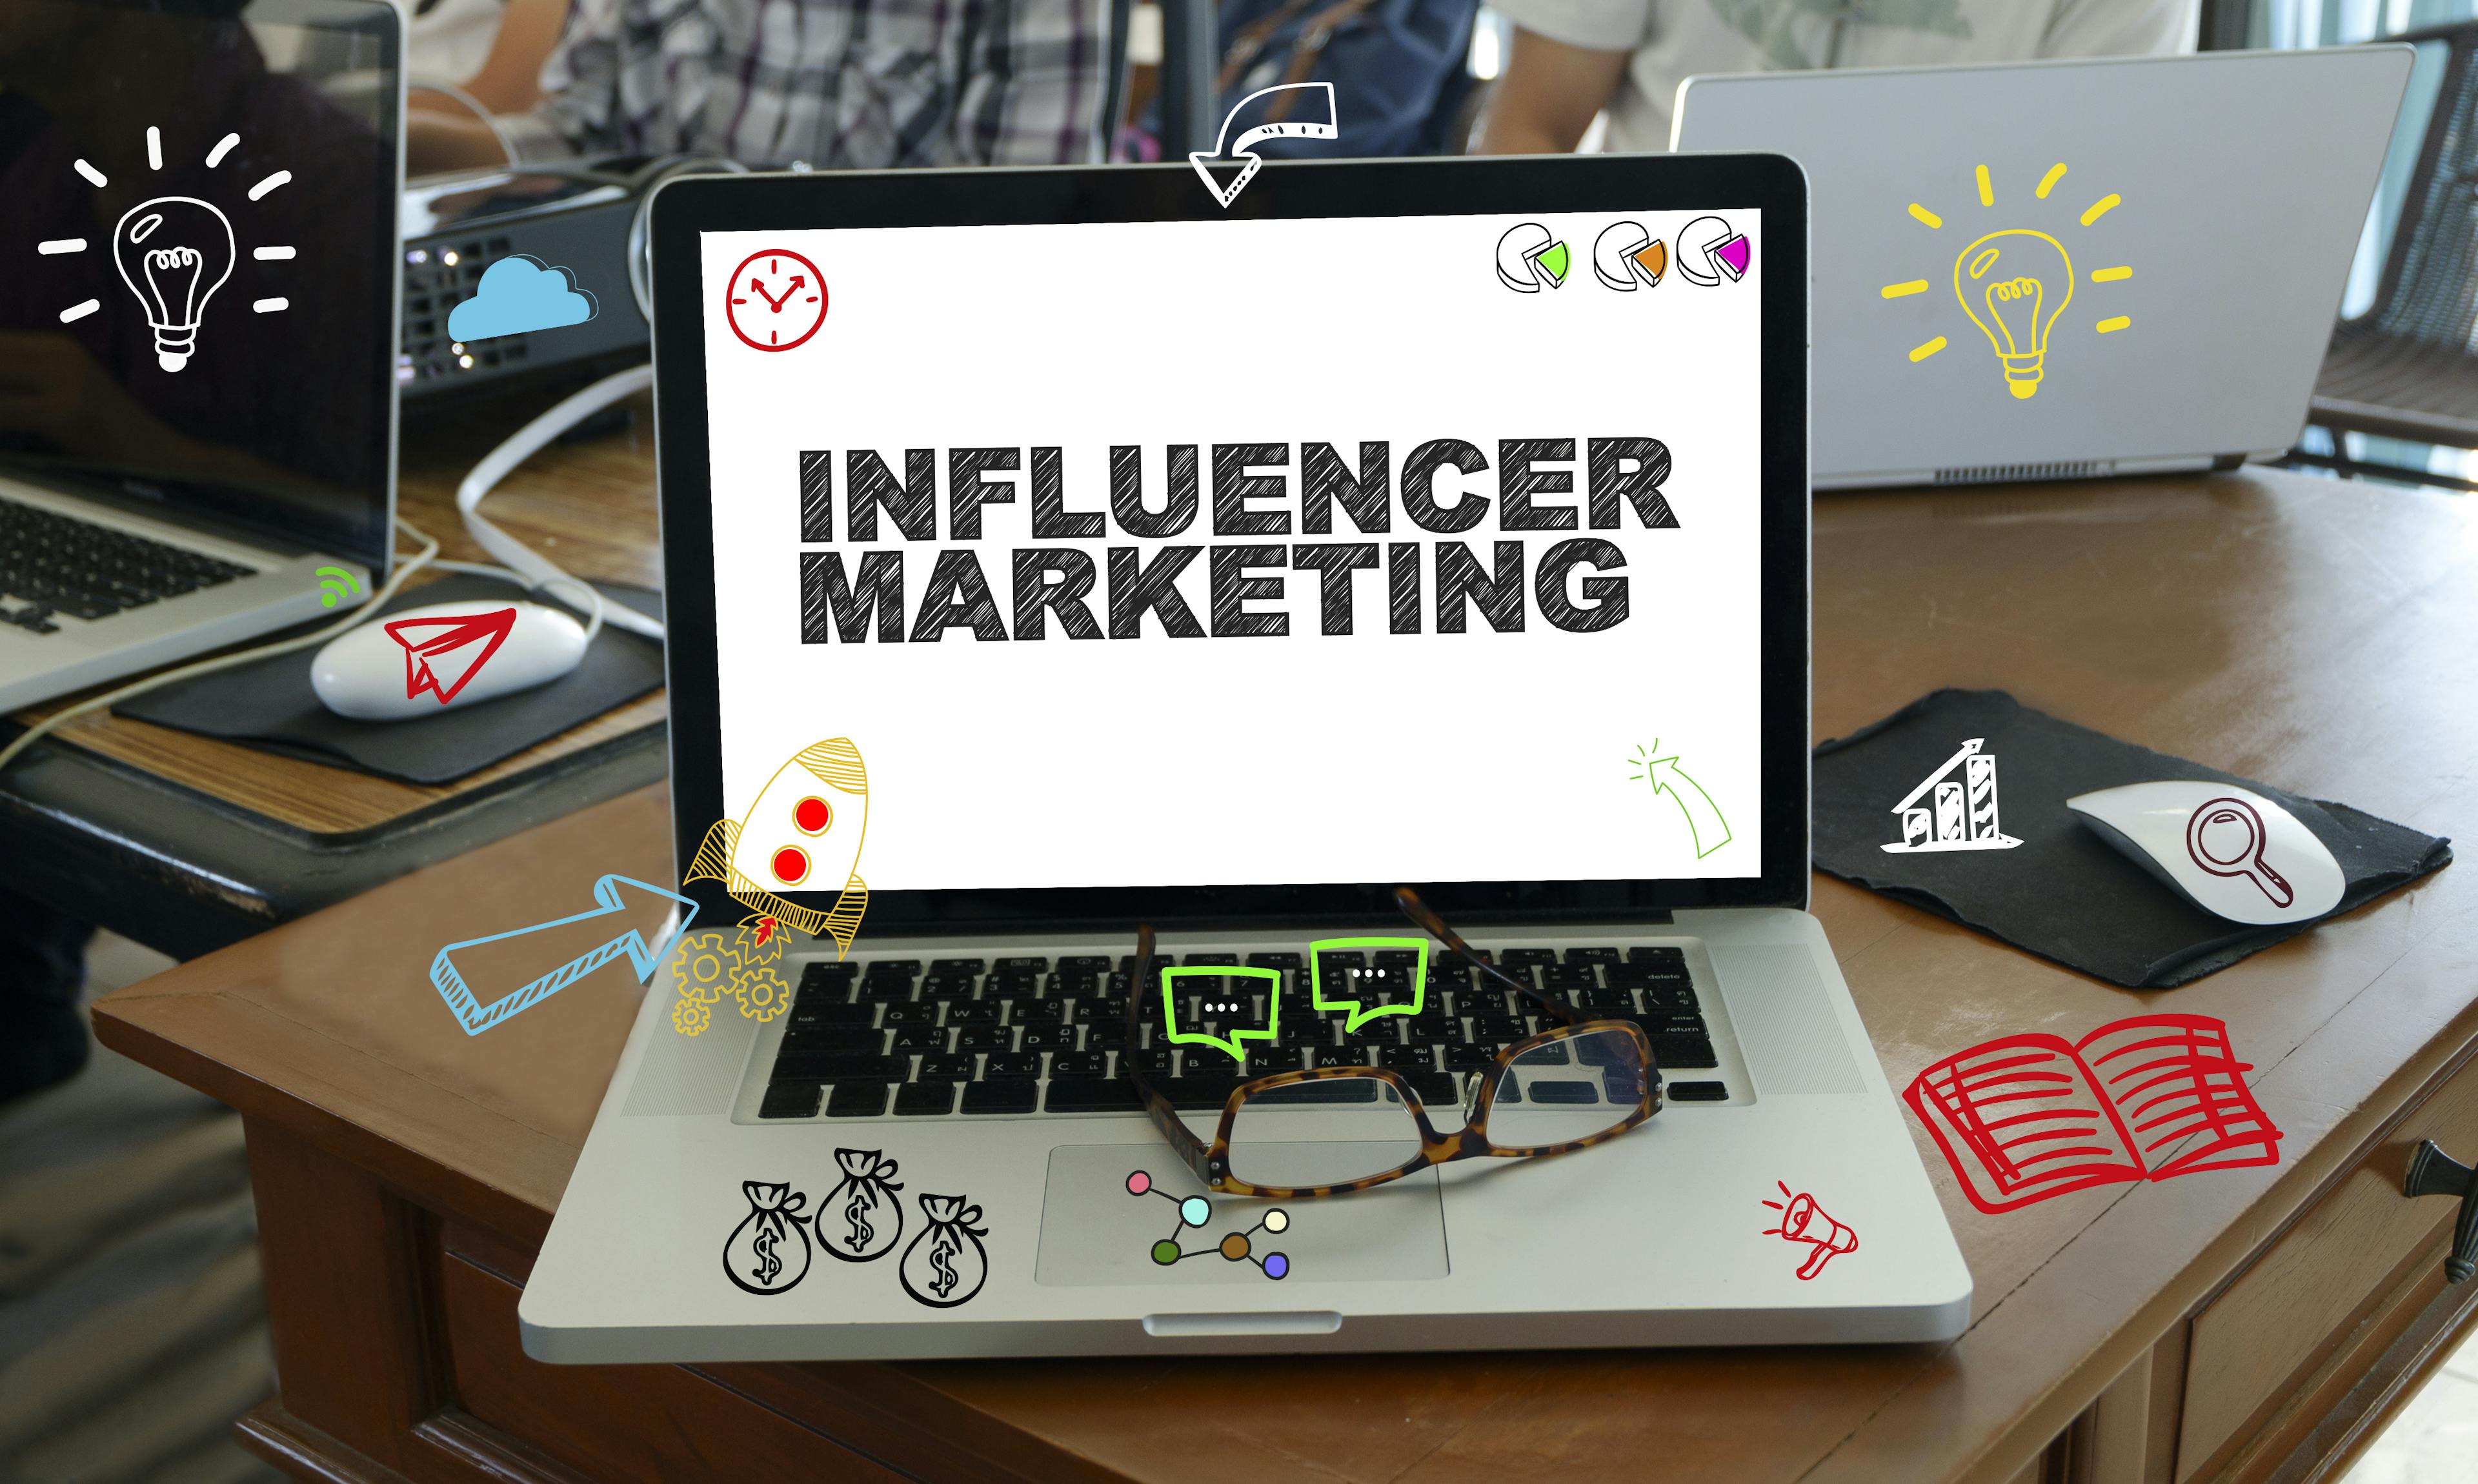 INFLUENCER MARKETING: WHY DO YOU NEED IT. HOW TO LEVERAGE IT